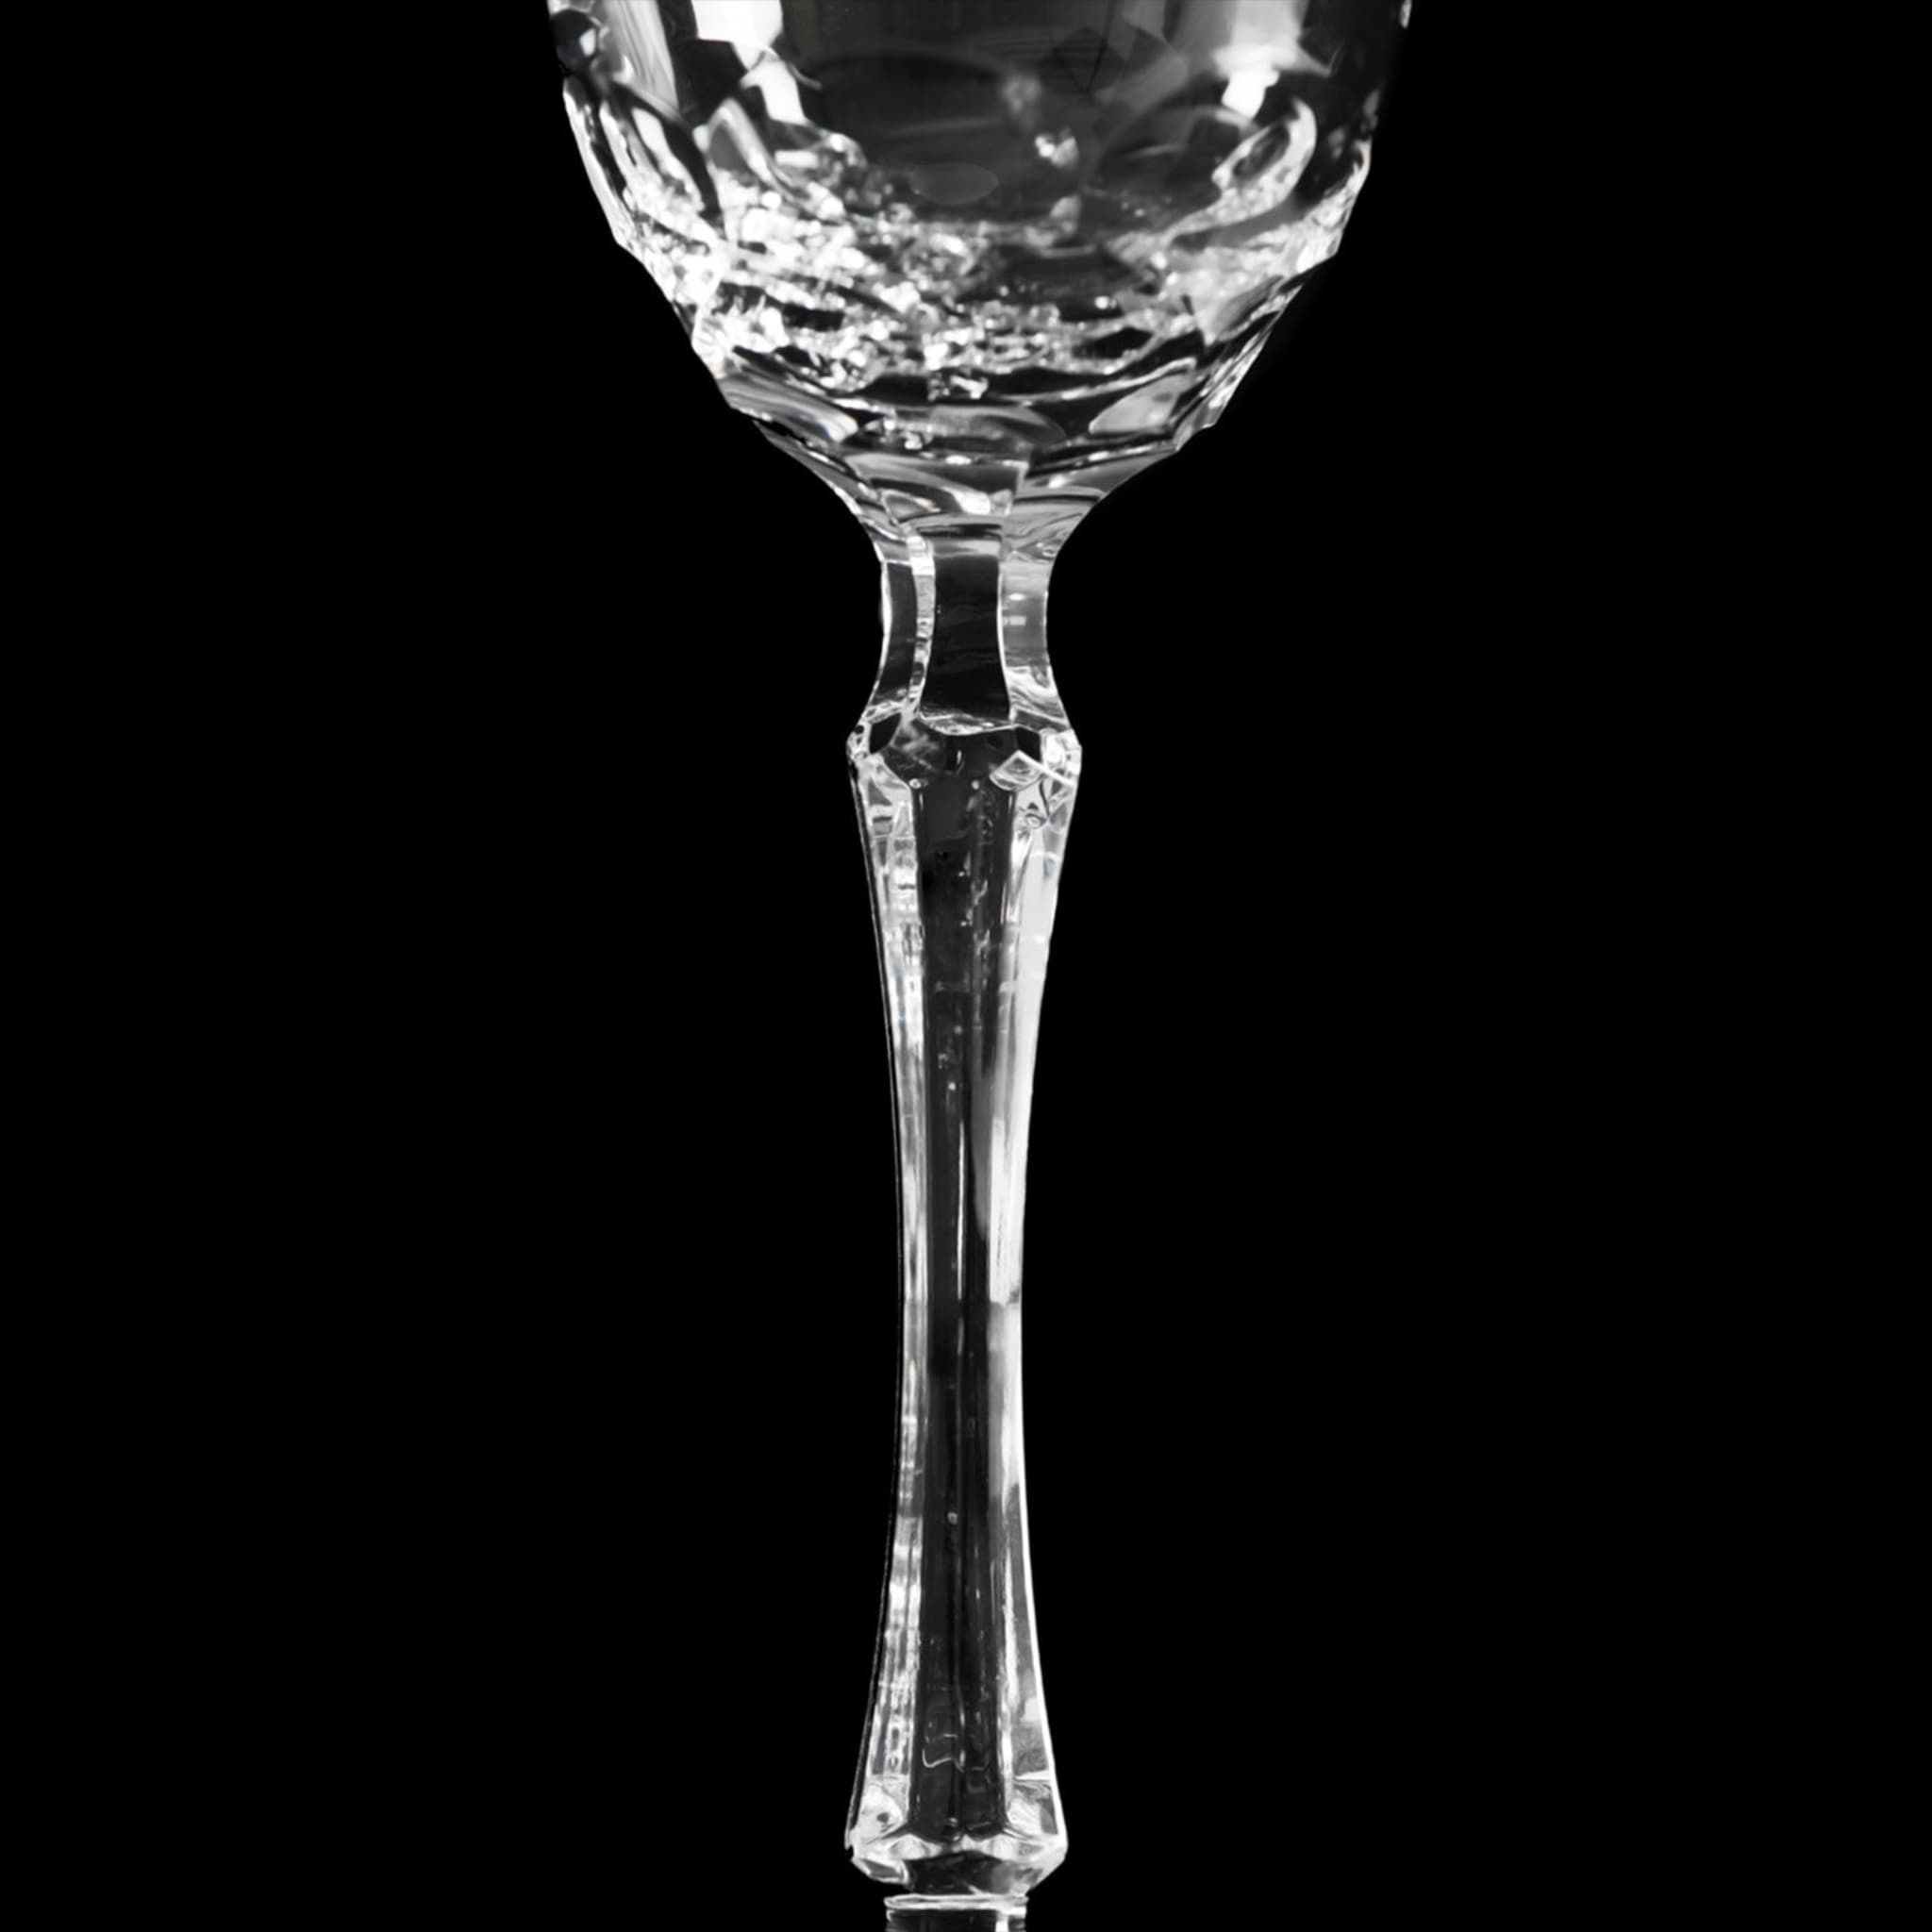 Set of 6 Narciso Crystal Wine Glasses - Alternative view 3